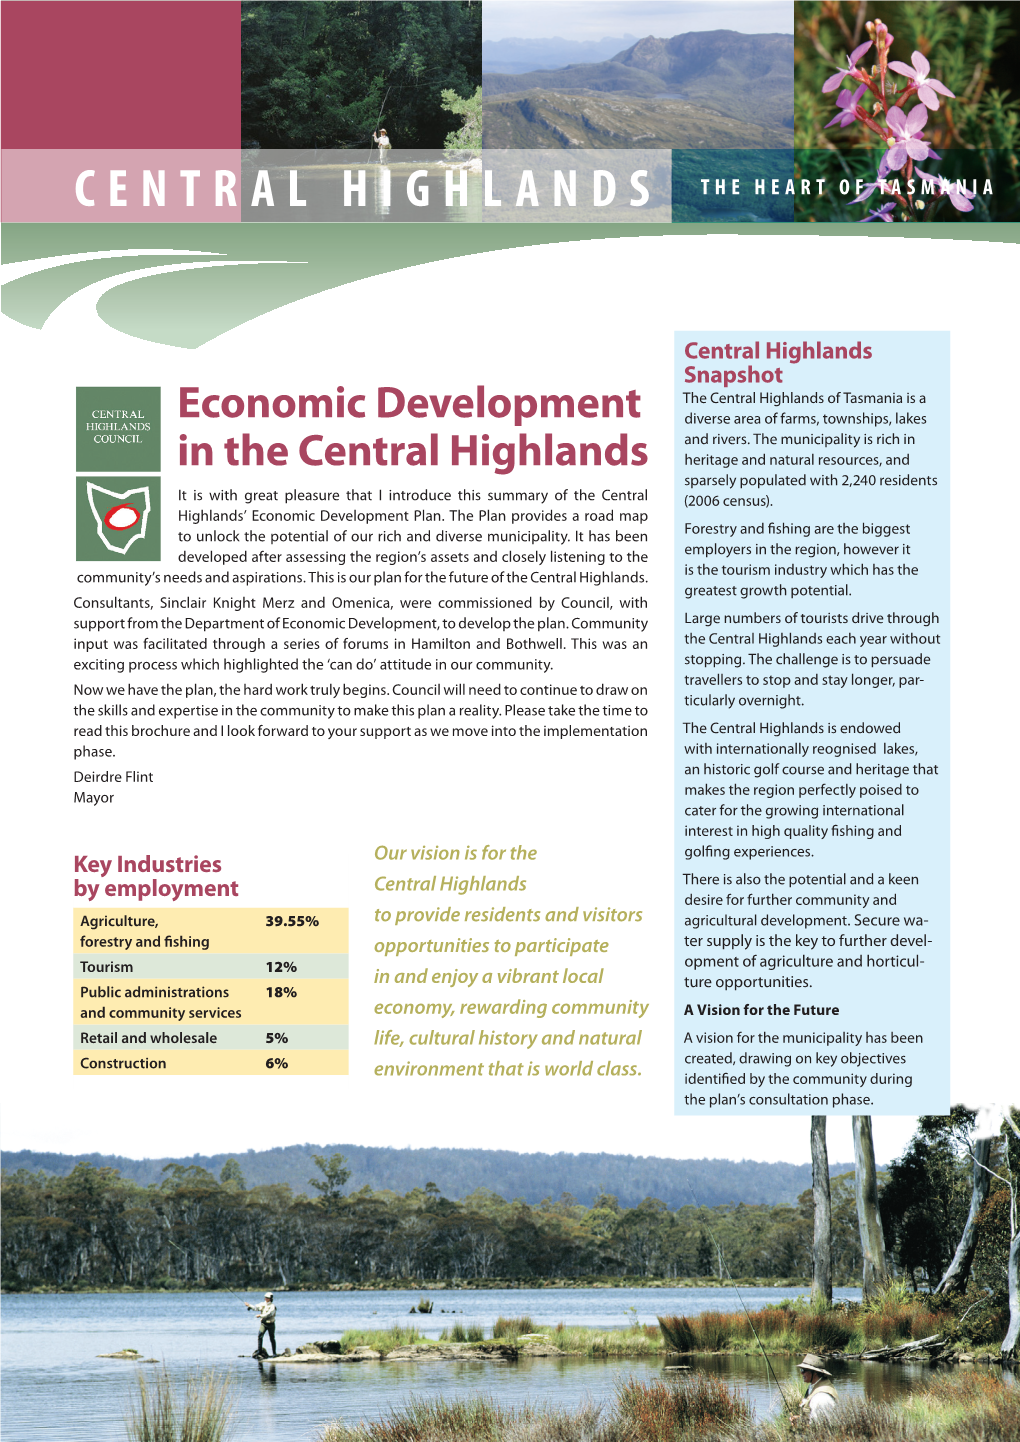 Economic Development in the Central Highlands